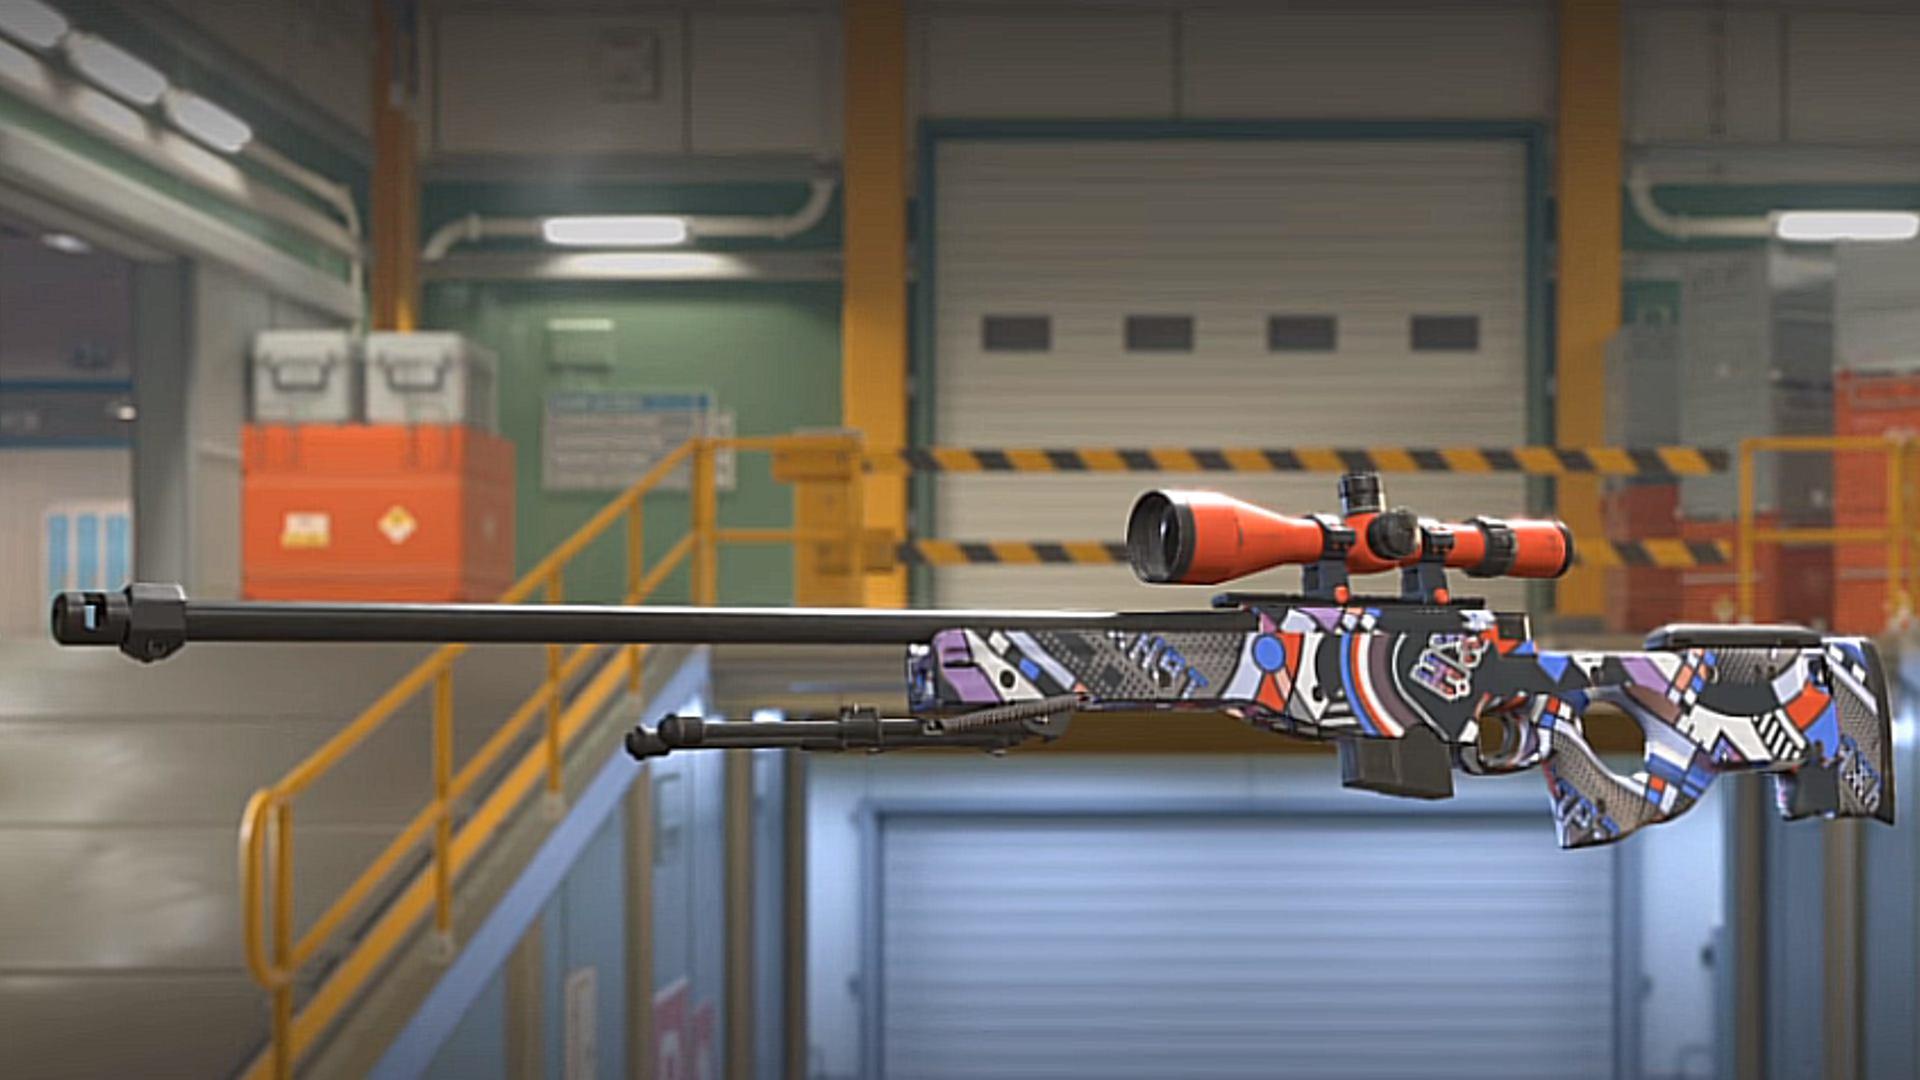 Will CS:GO skins carry over to Counter-Strike 2? - Dot Esports